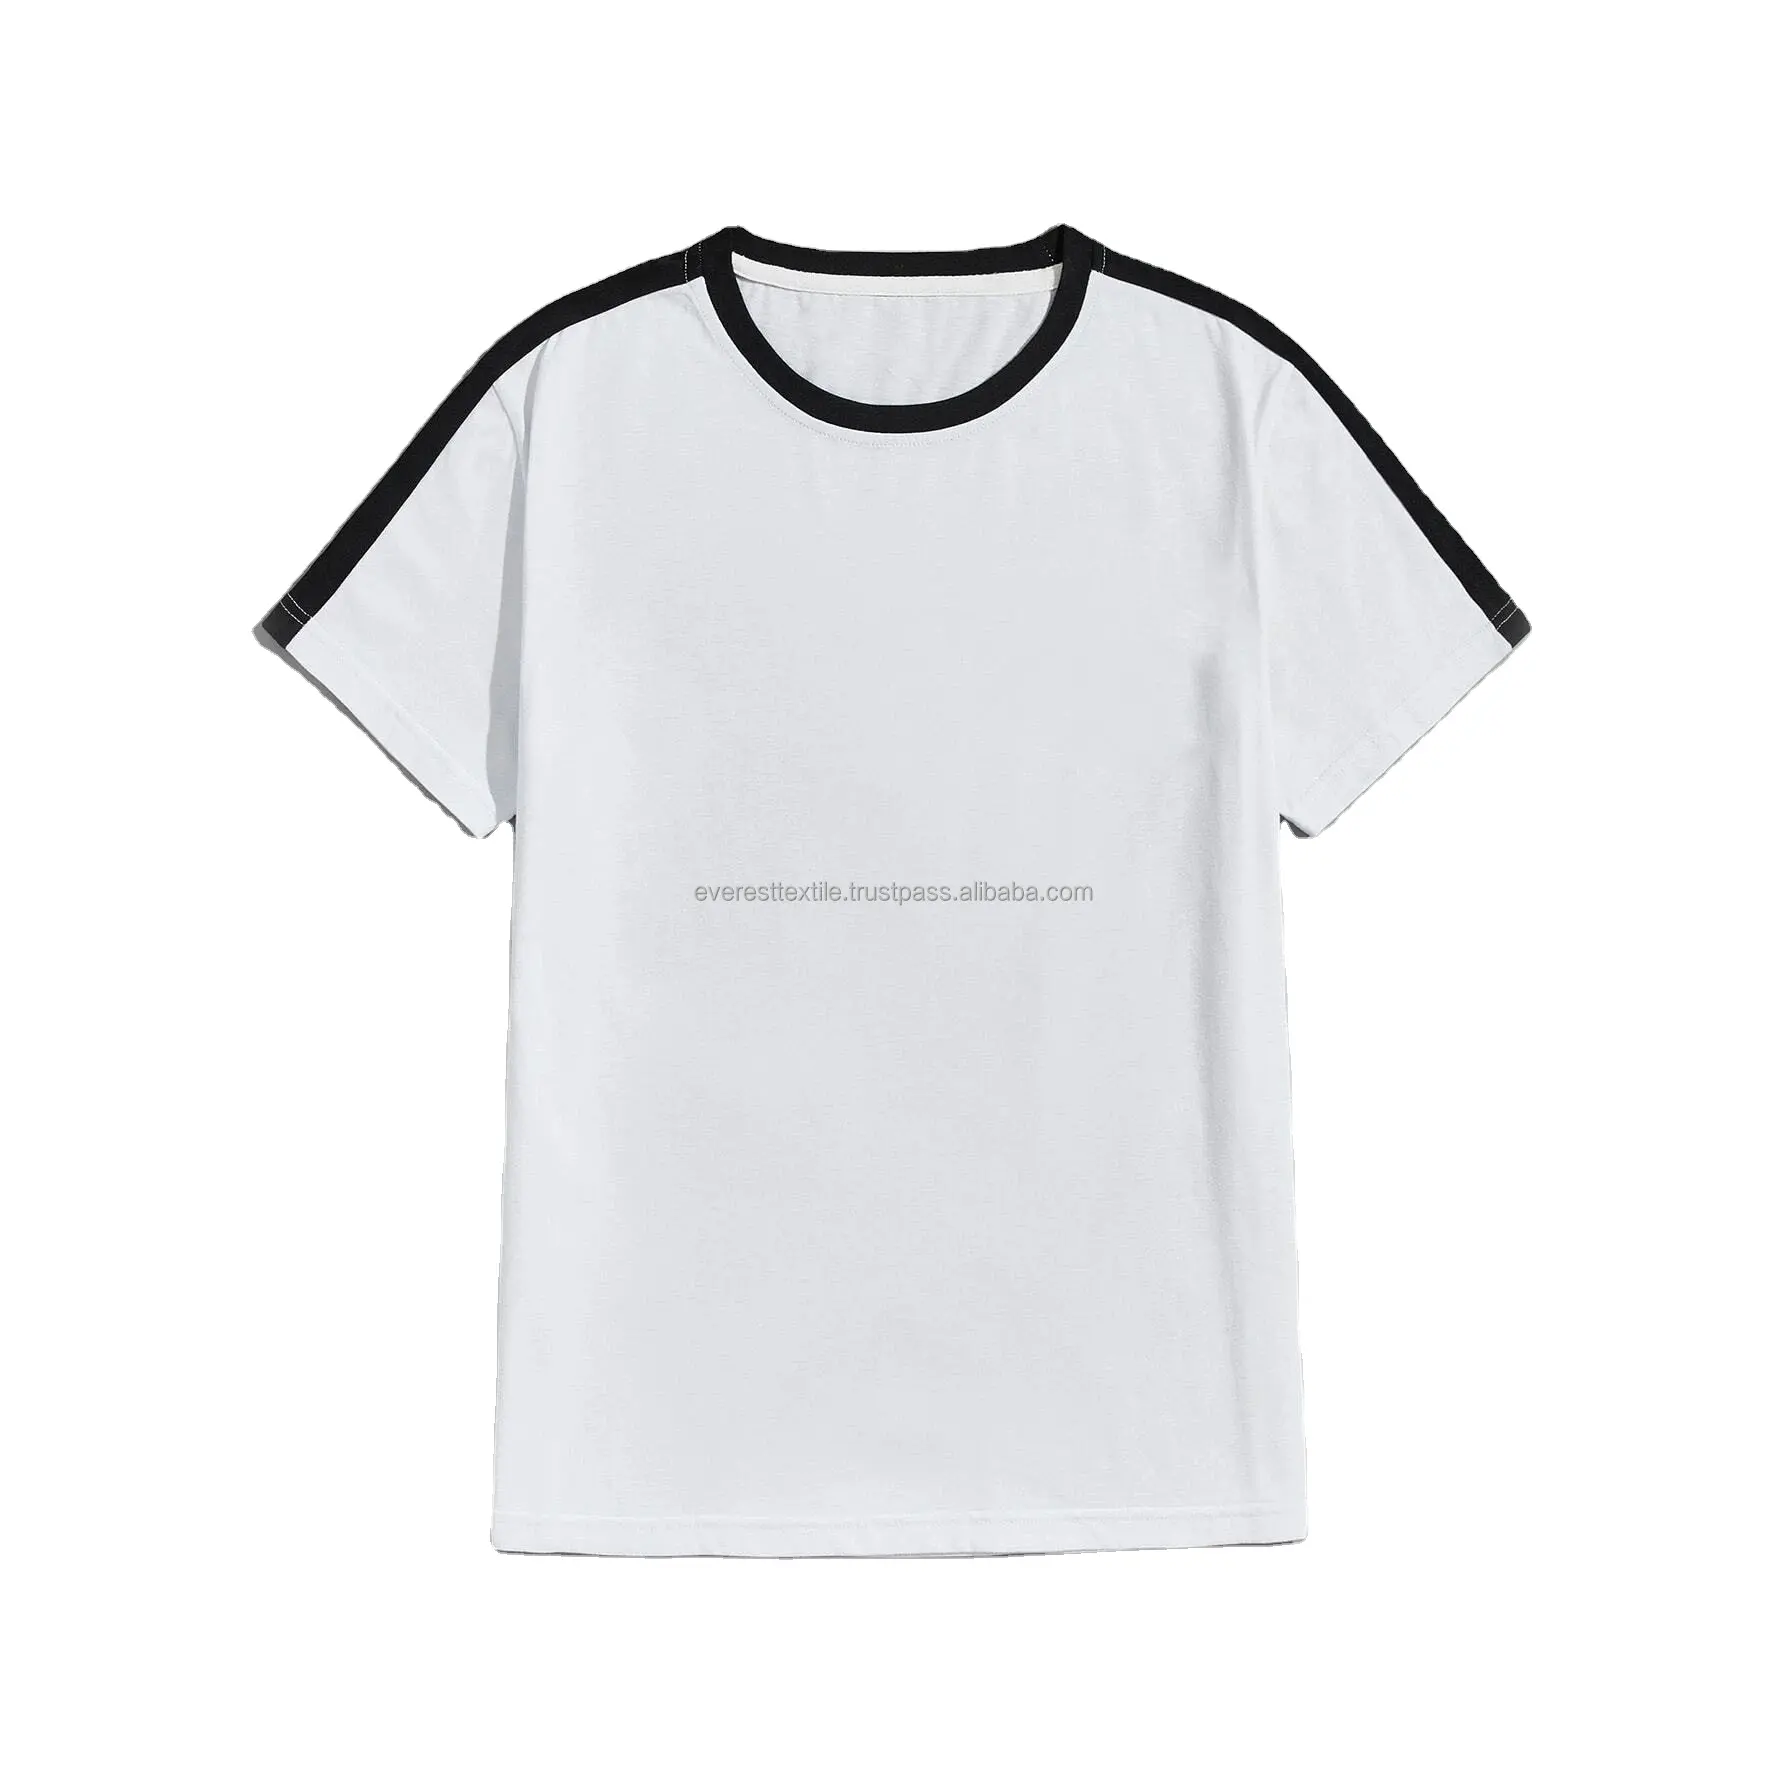 Blank White T-shirt With Black Stripe On Sleeve And Round Neck